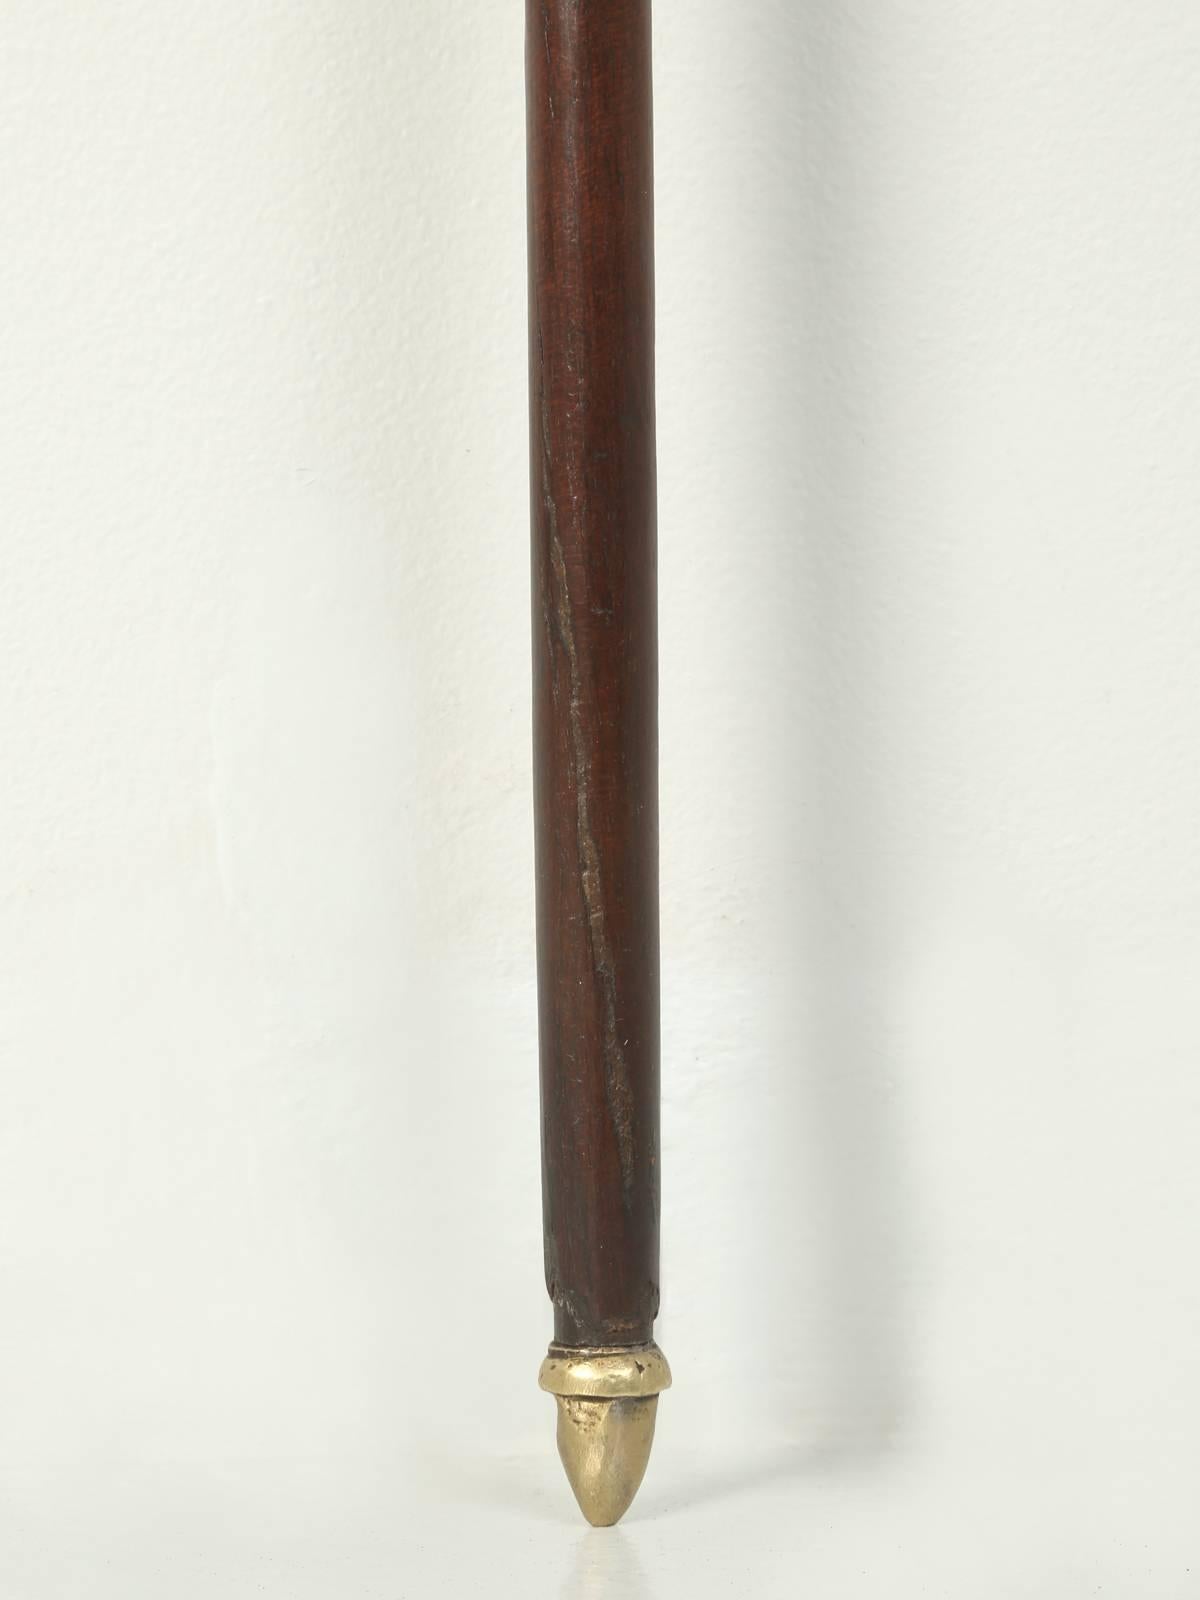 Late 19th Century Antique French Gun Walking Stick or Cane